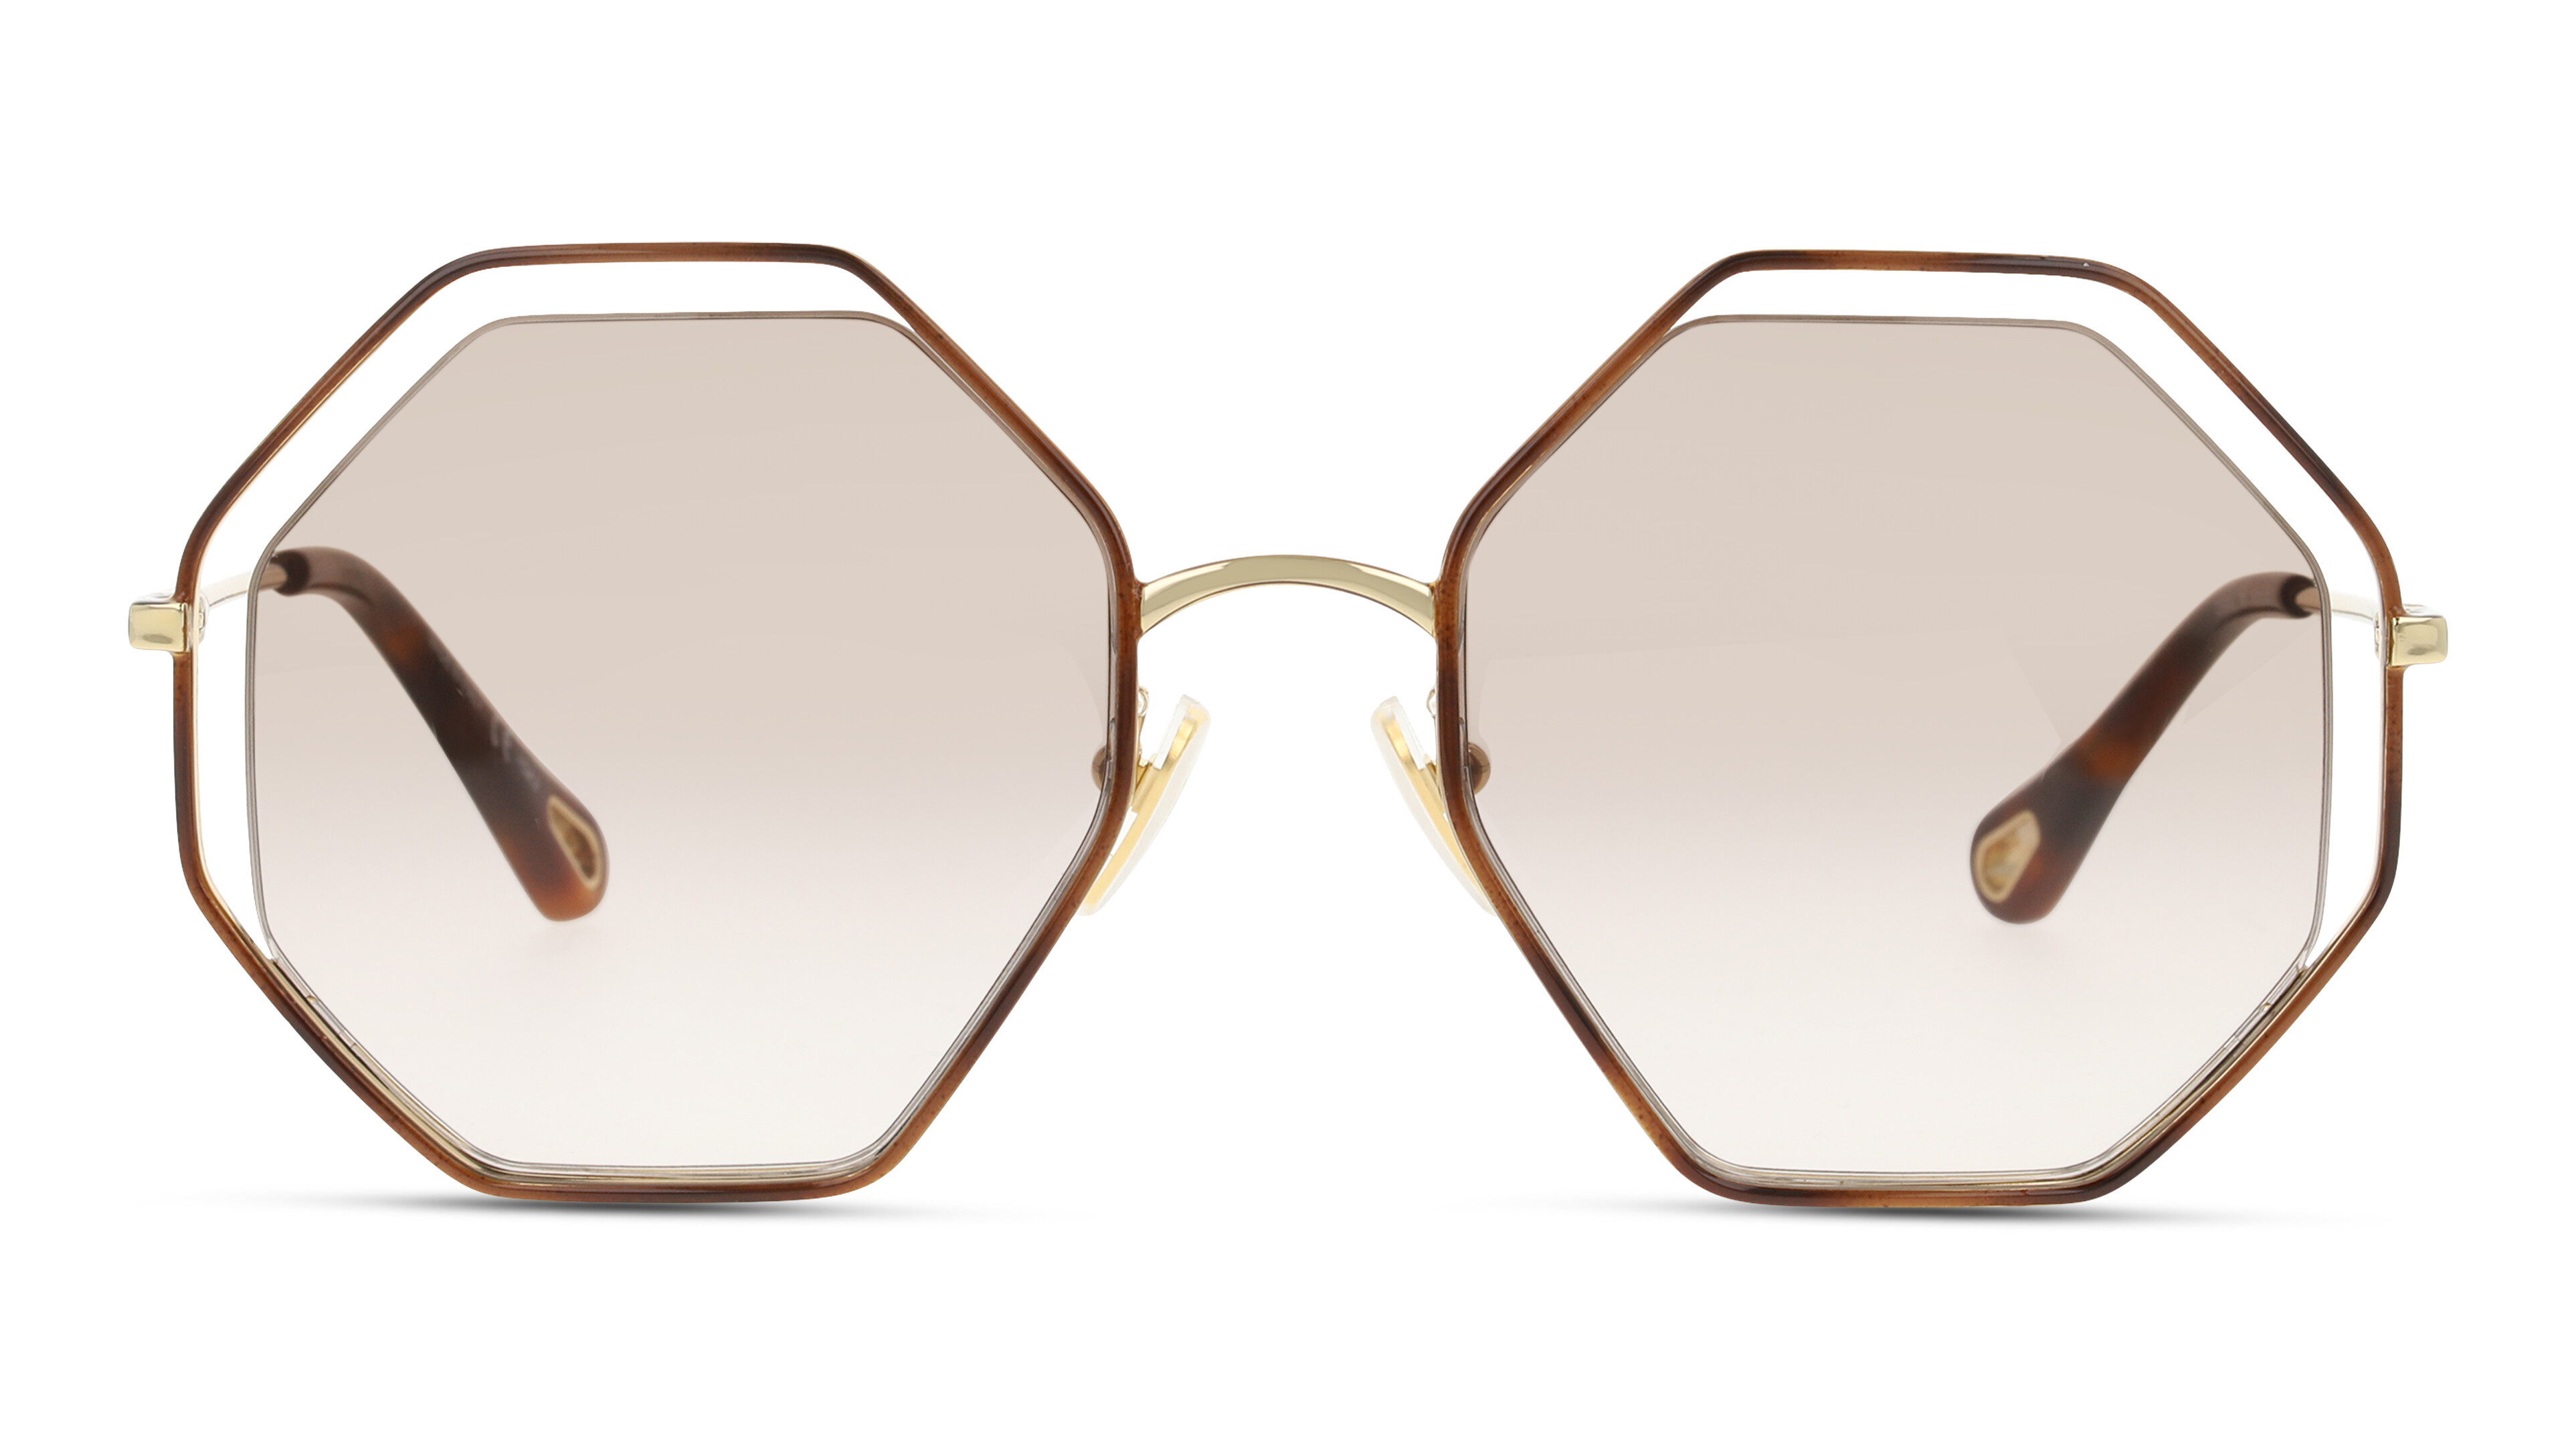 [products.image.front] Chloe CH0046S 004 Sonnenbrille